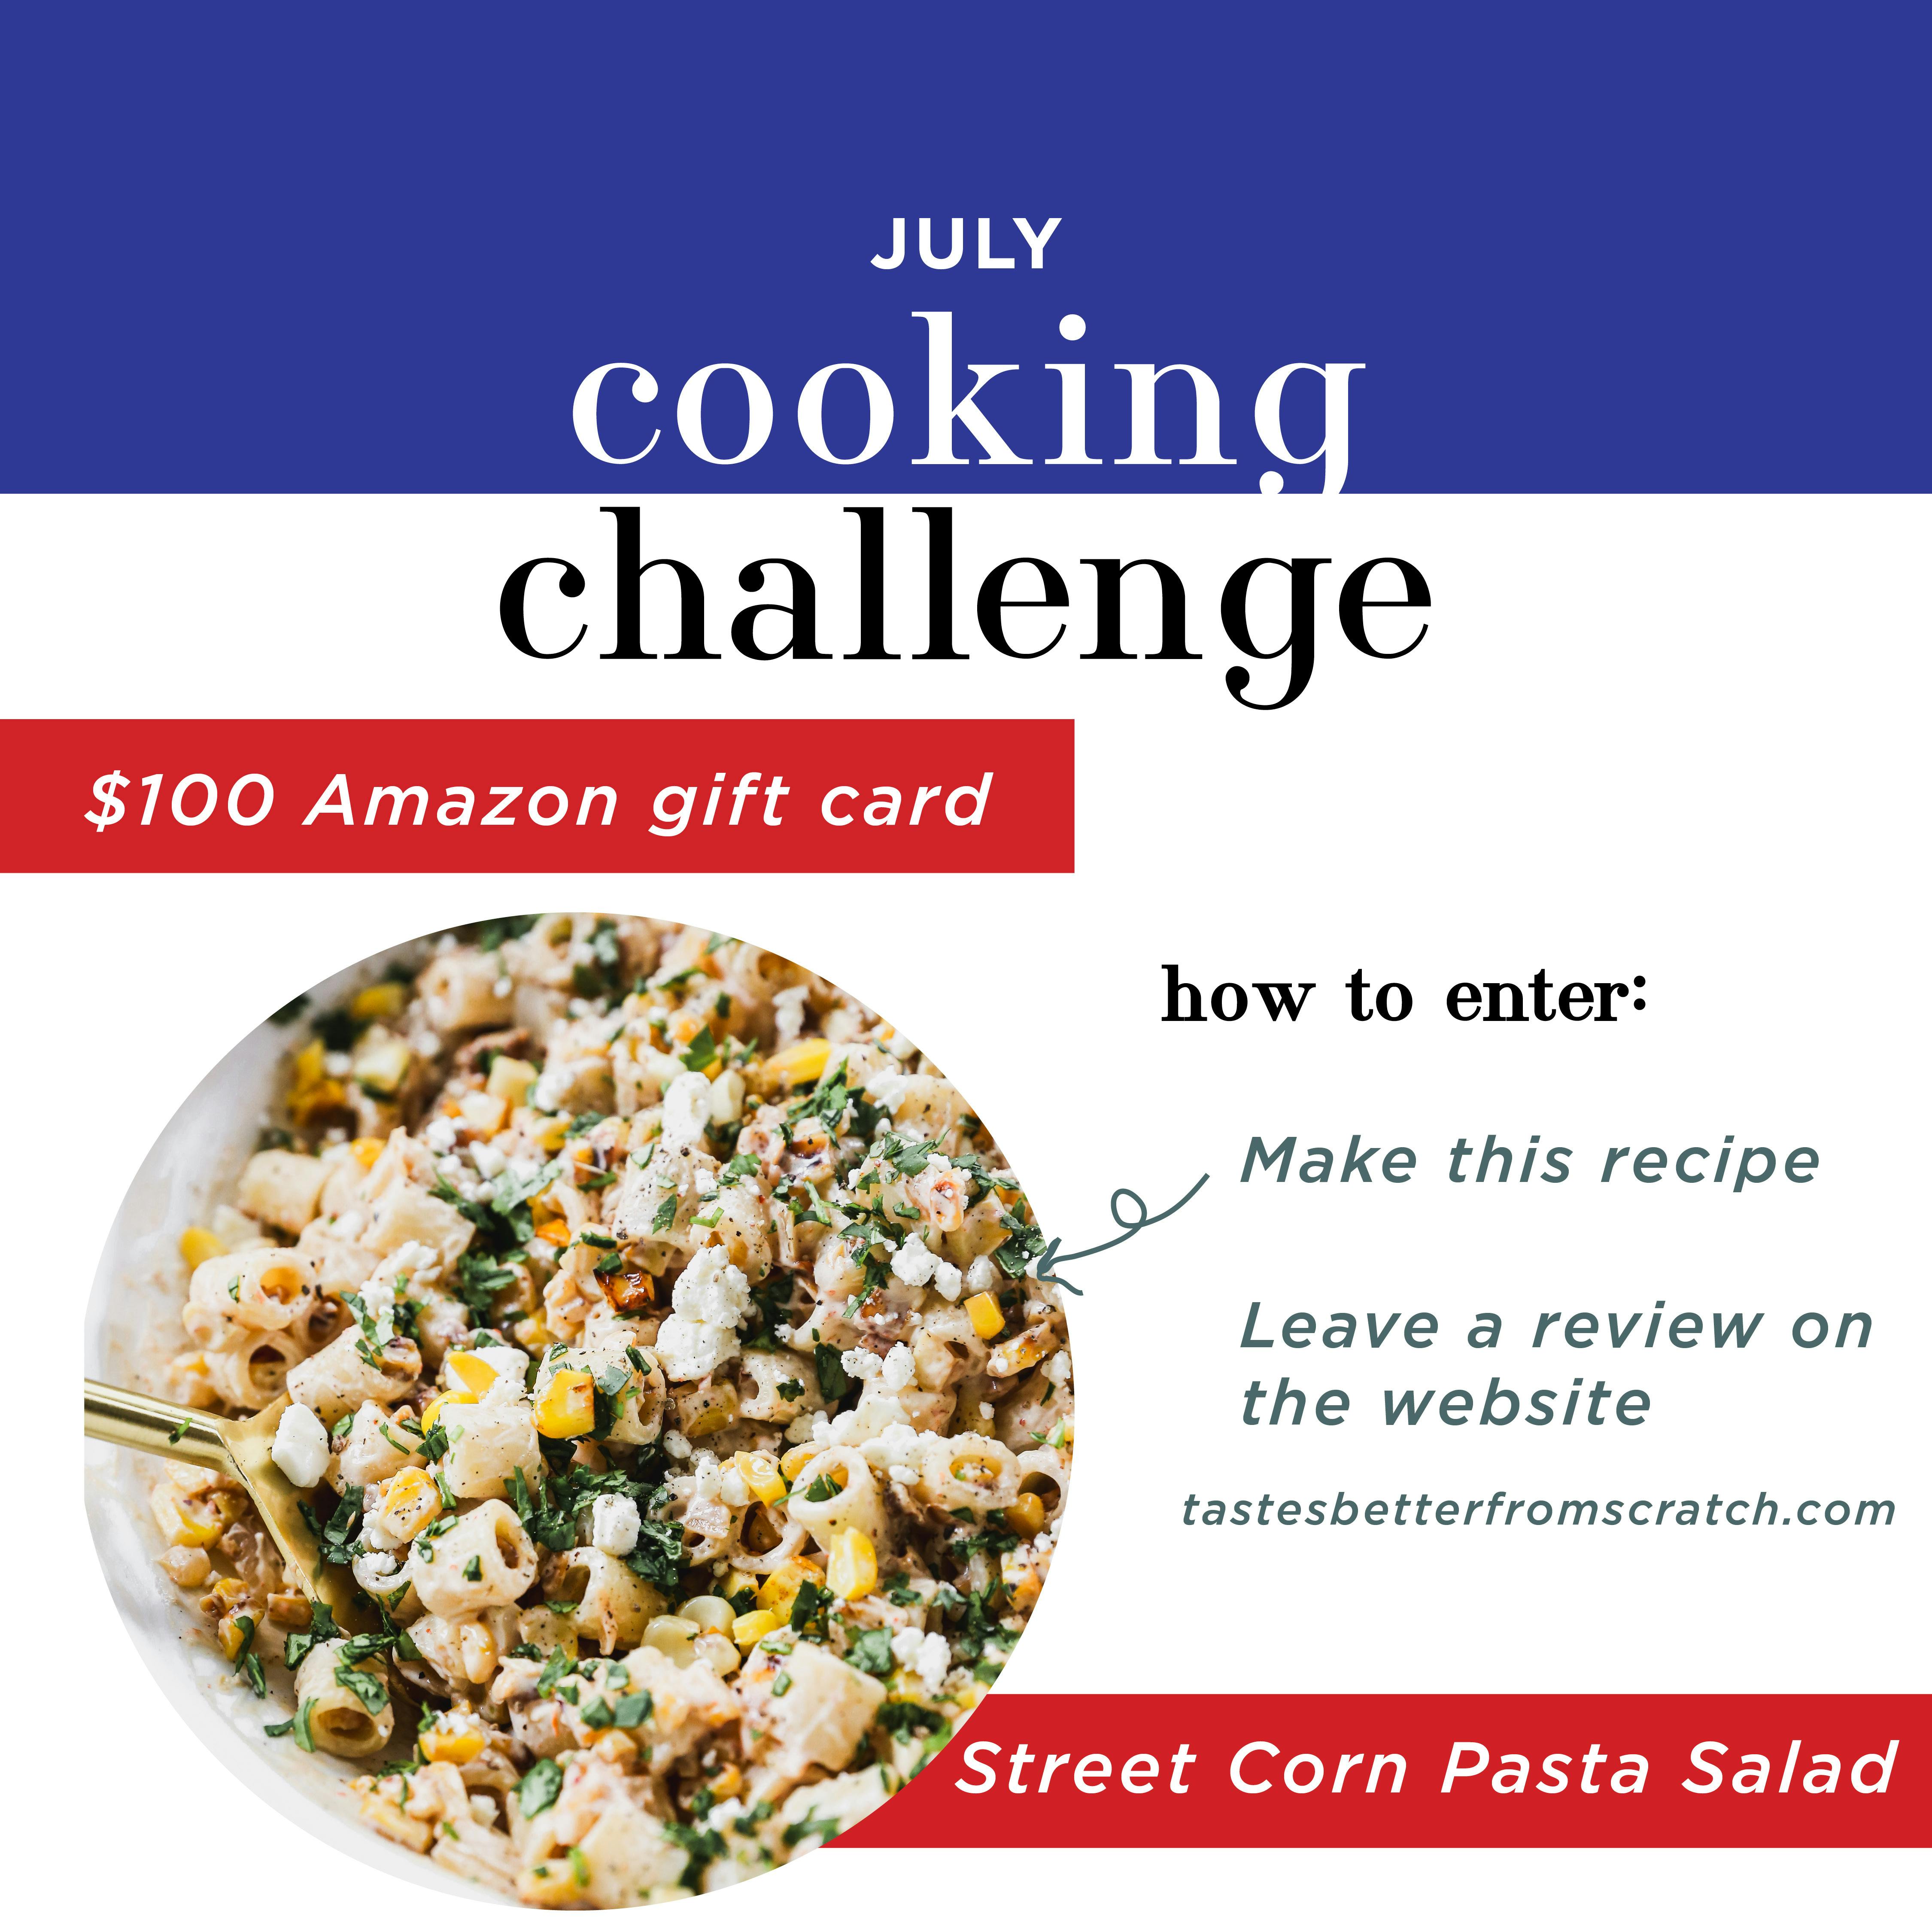 July Cooking Challenge: Win a $100 Amazon gift card by making Street Corn Pasta Salad and leaving a review on the website. Tastesbetterfromscratch.com.